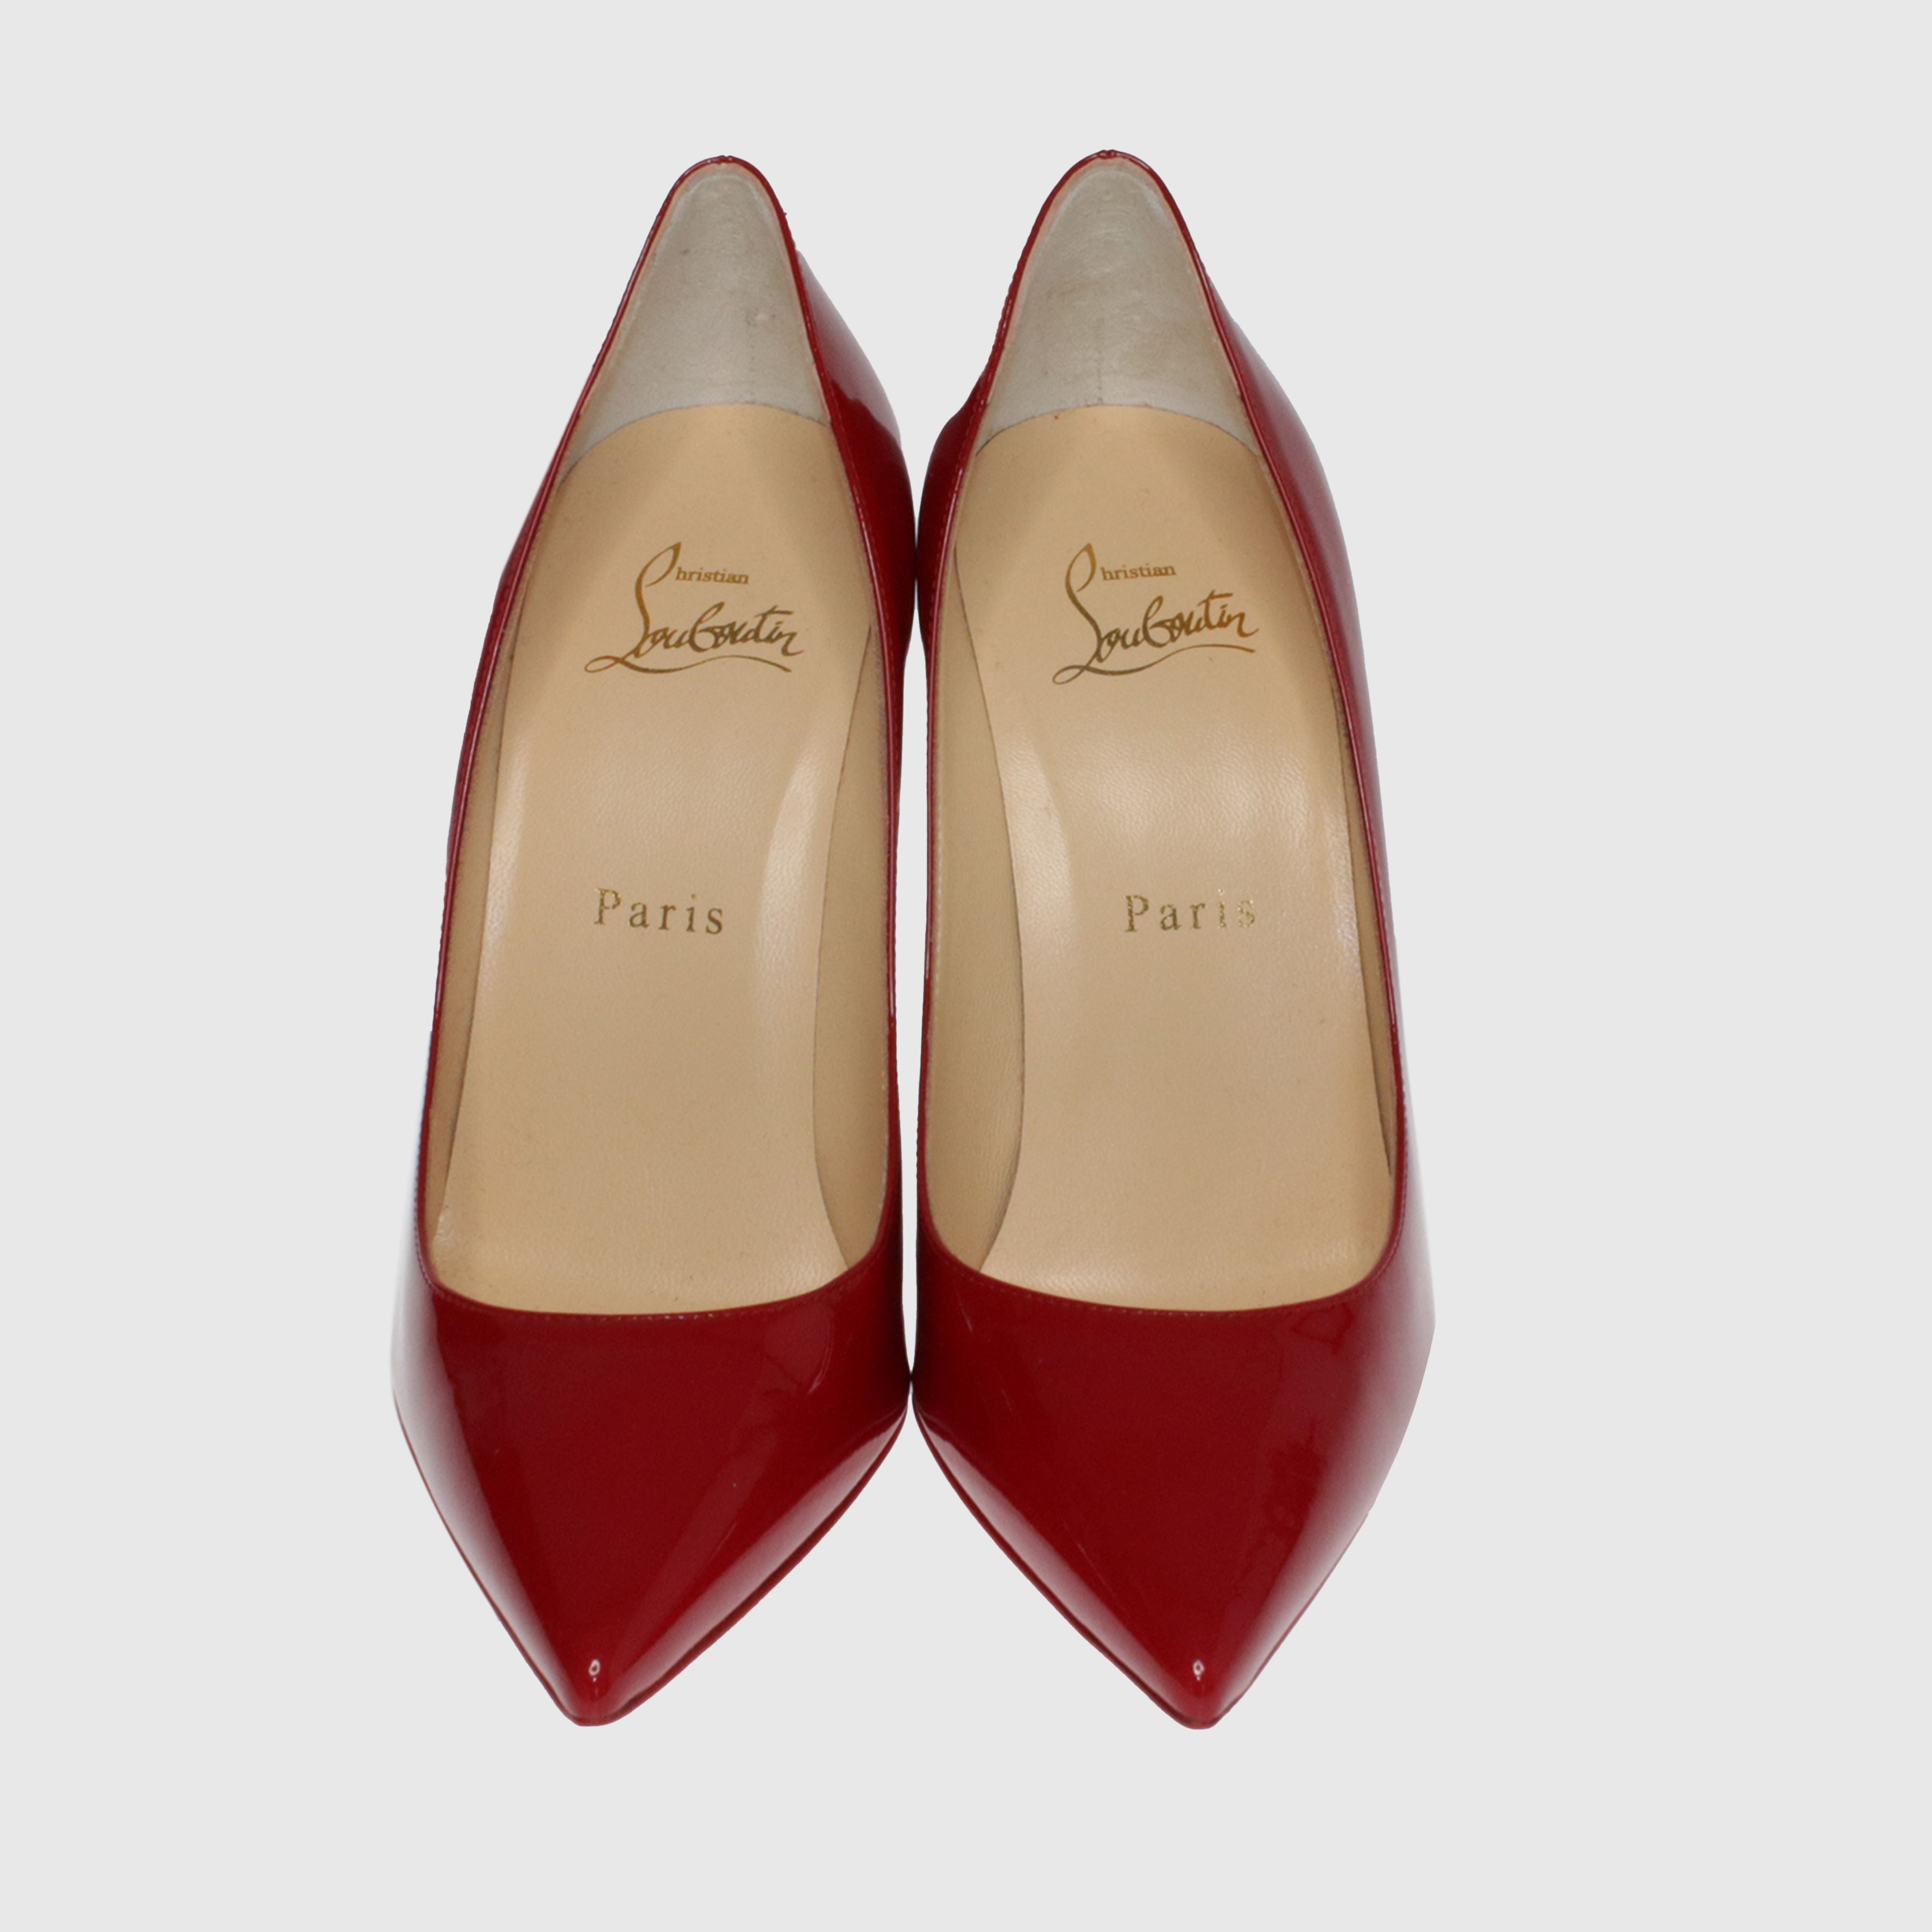 Red Kate 100 Pointed Toe Pumps Shoes Christian Louboutin 